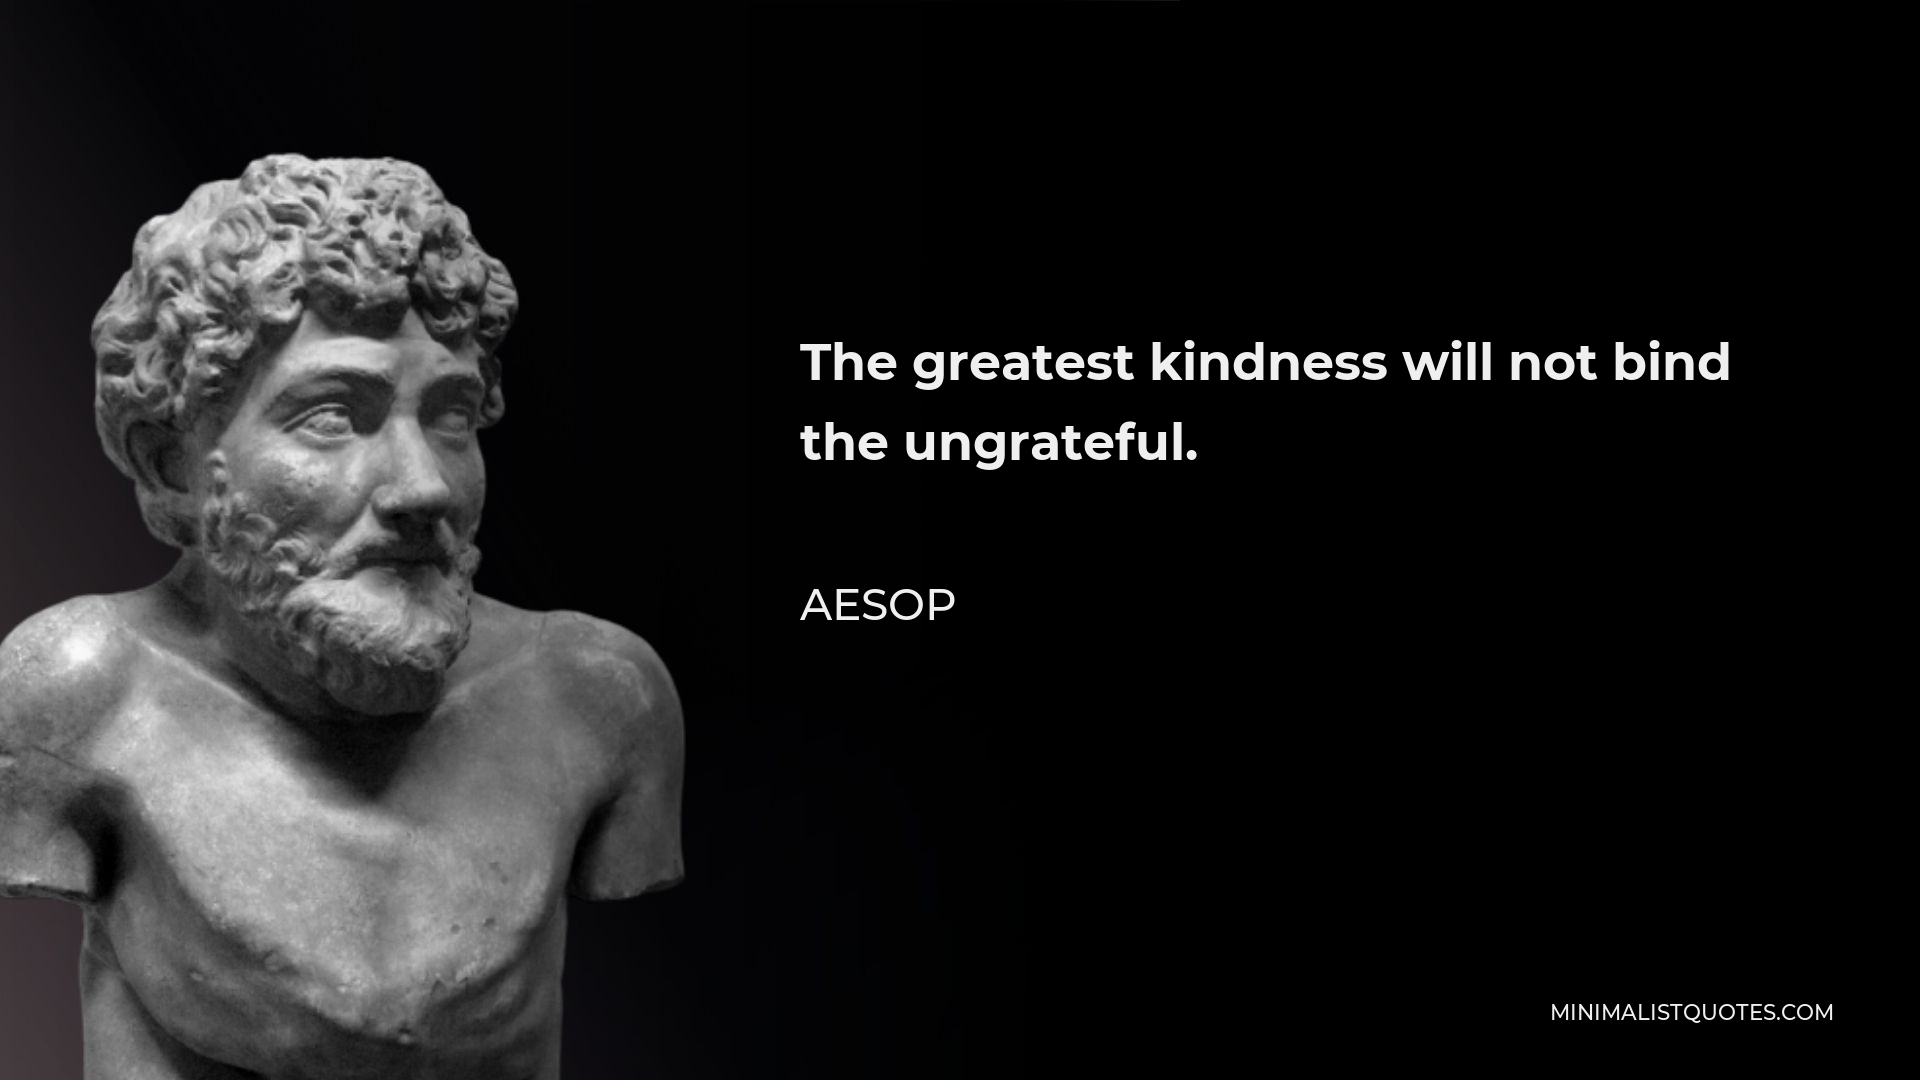 Aesop Quote - The greatest kindness will not bind the ungrateful.